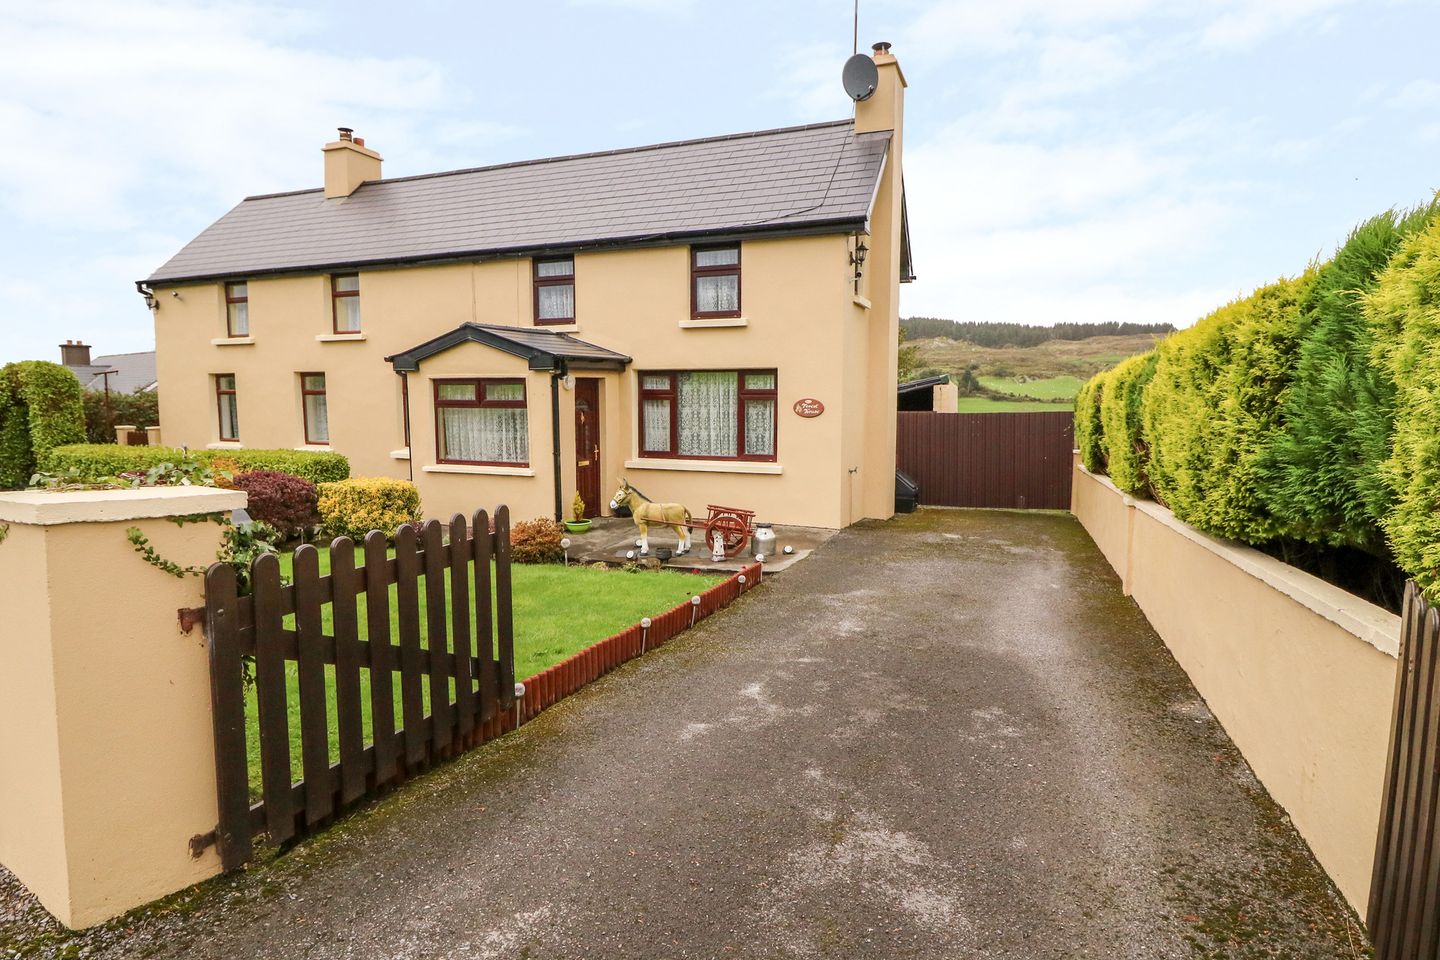 Ref. 1022915 Forest View, Glounathnaw, Bantry, Co. Cork